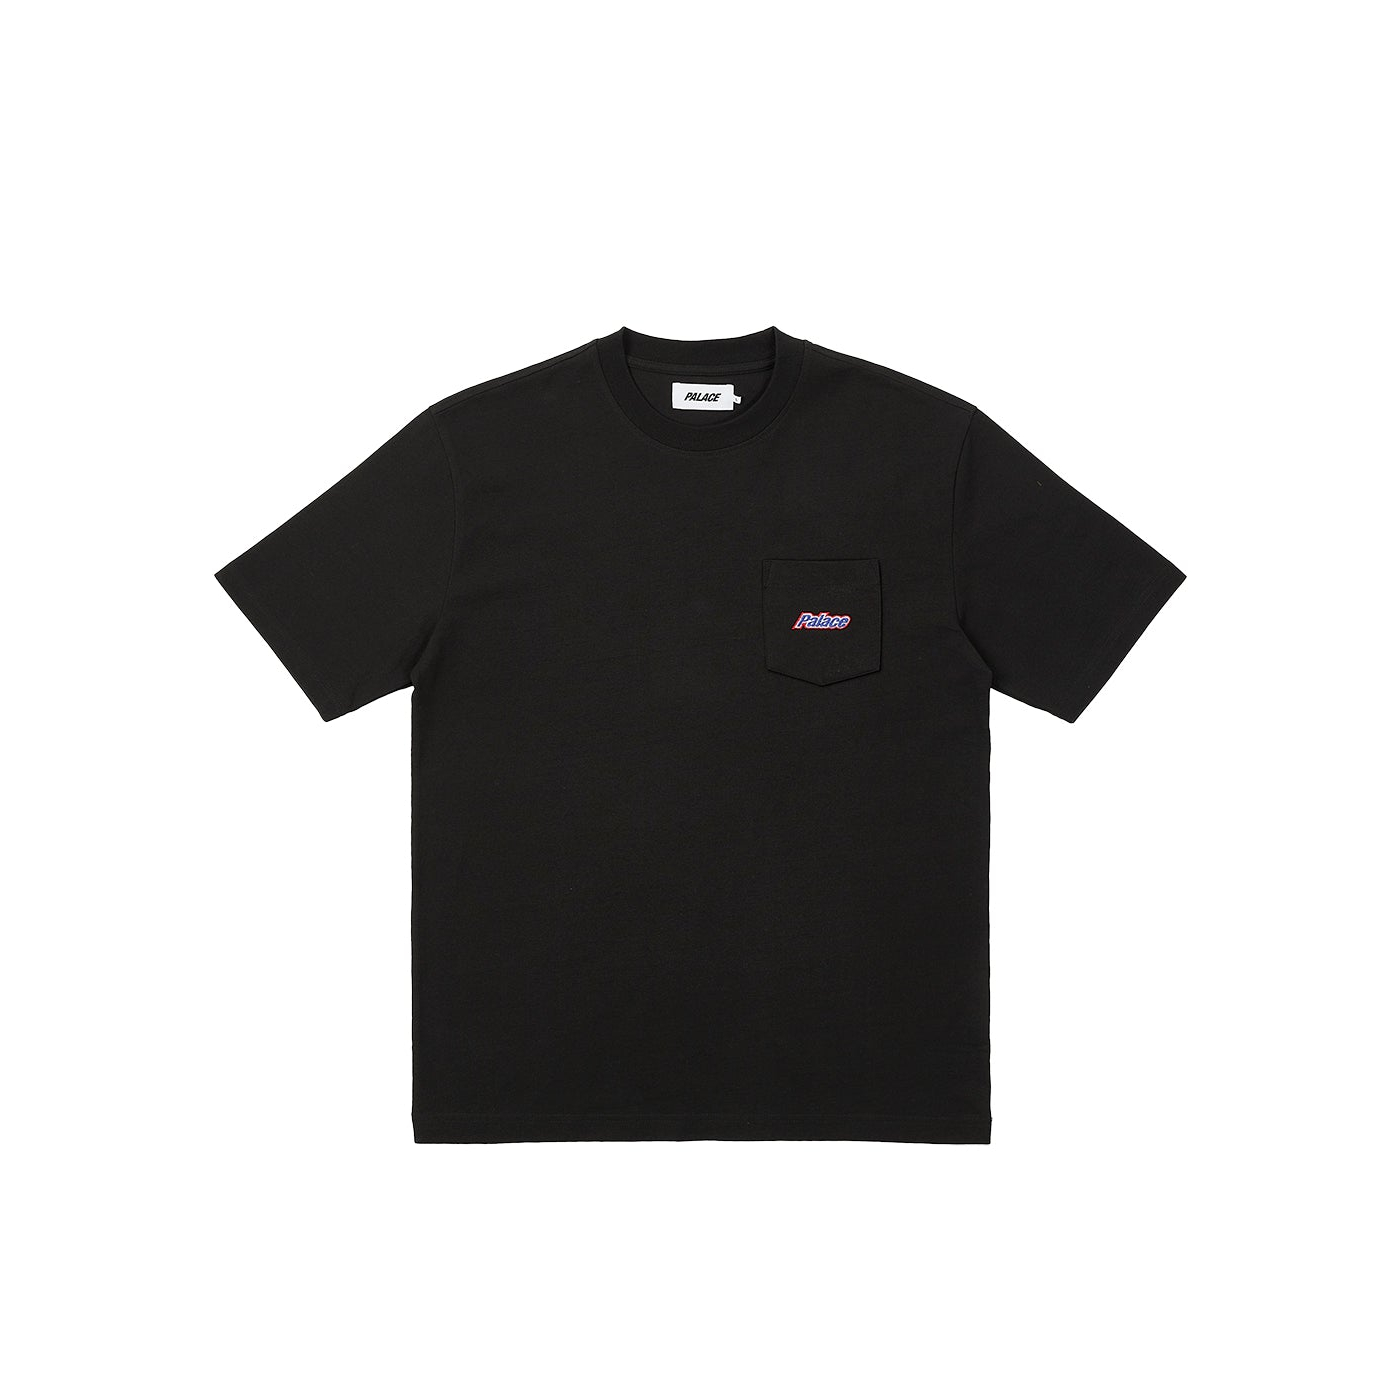 Thumbnail EMBROIDERED POCKET T-SHIRT BLACK one color